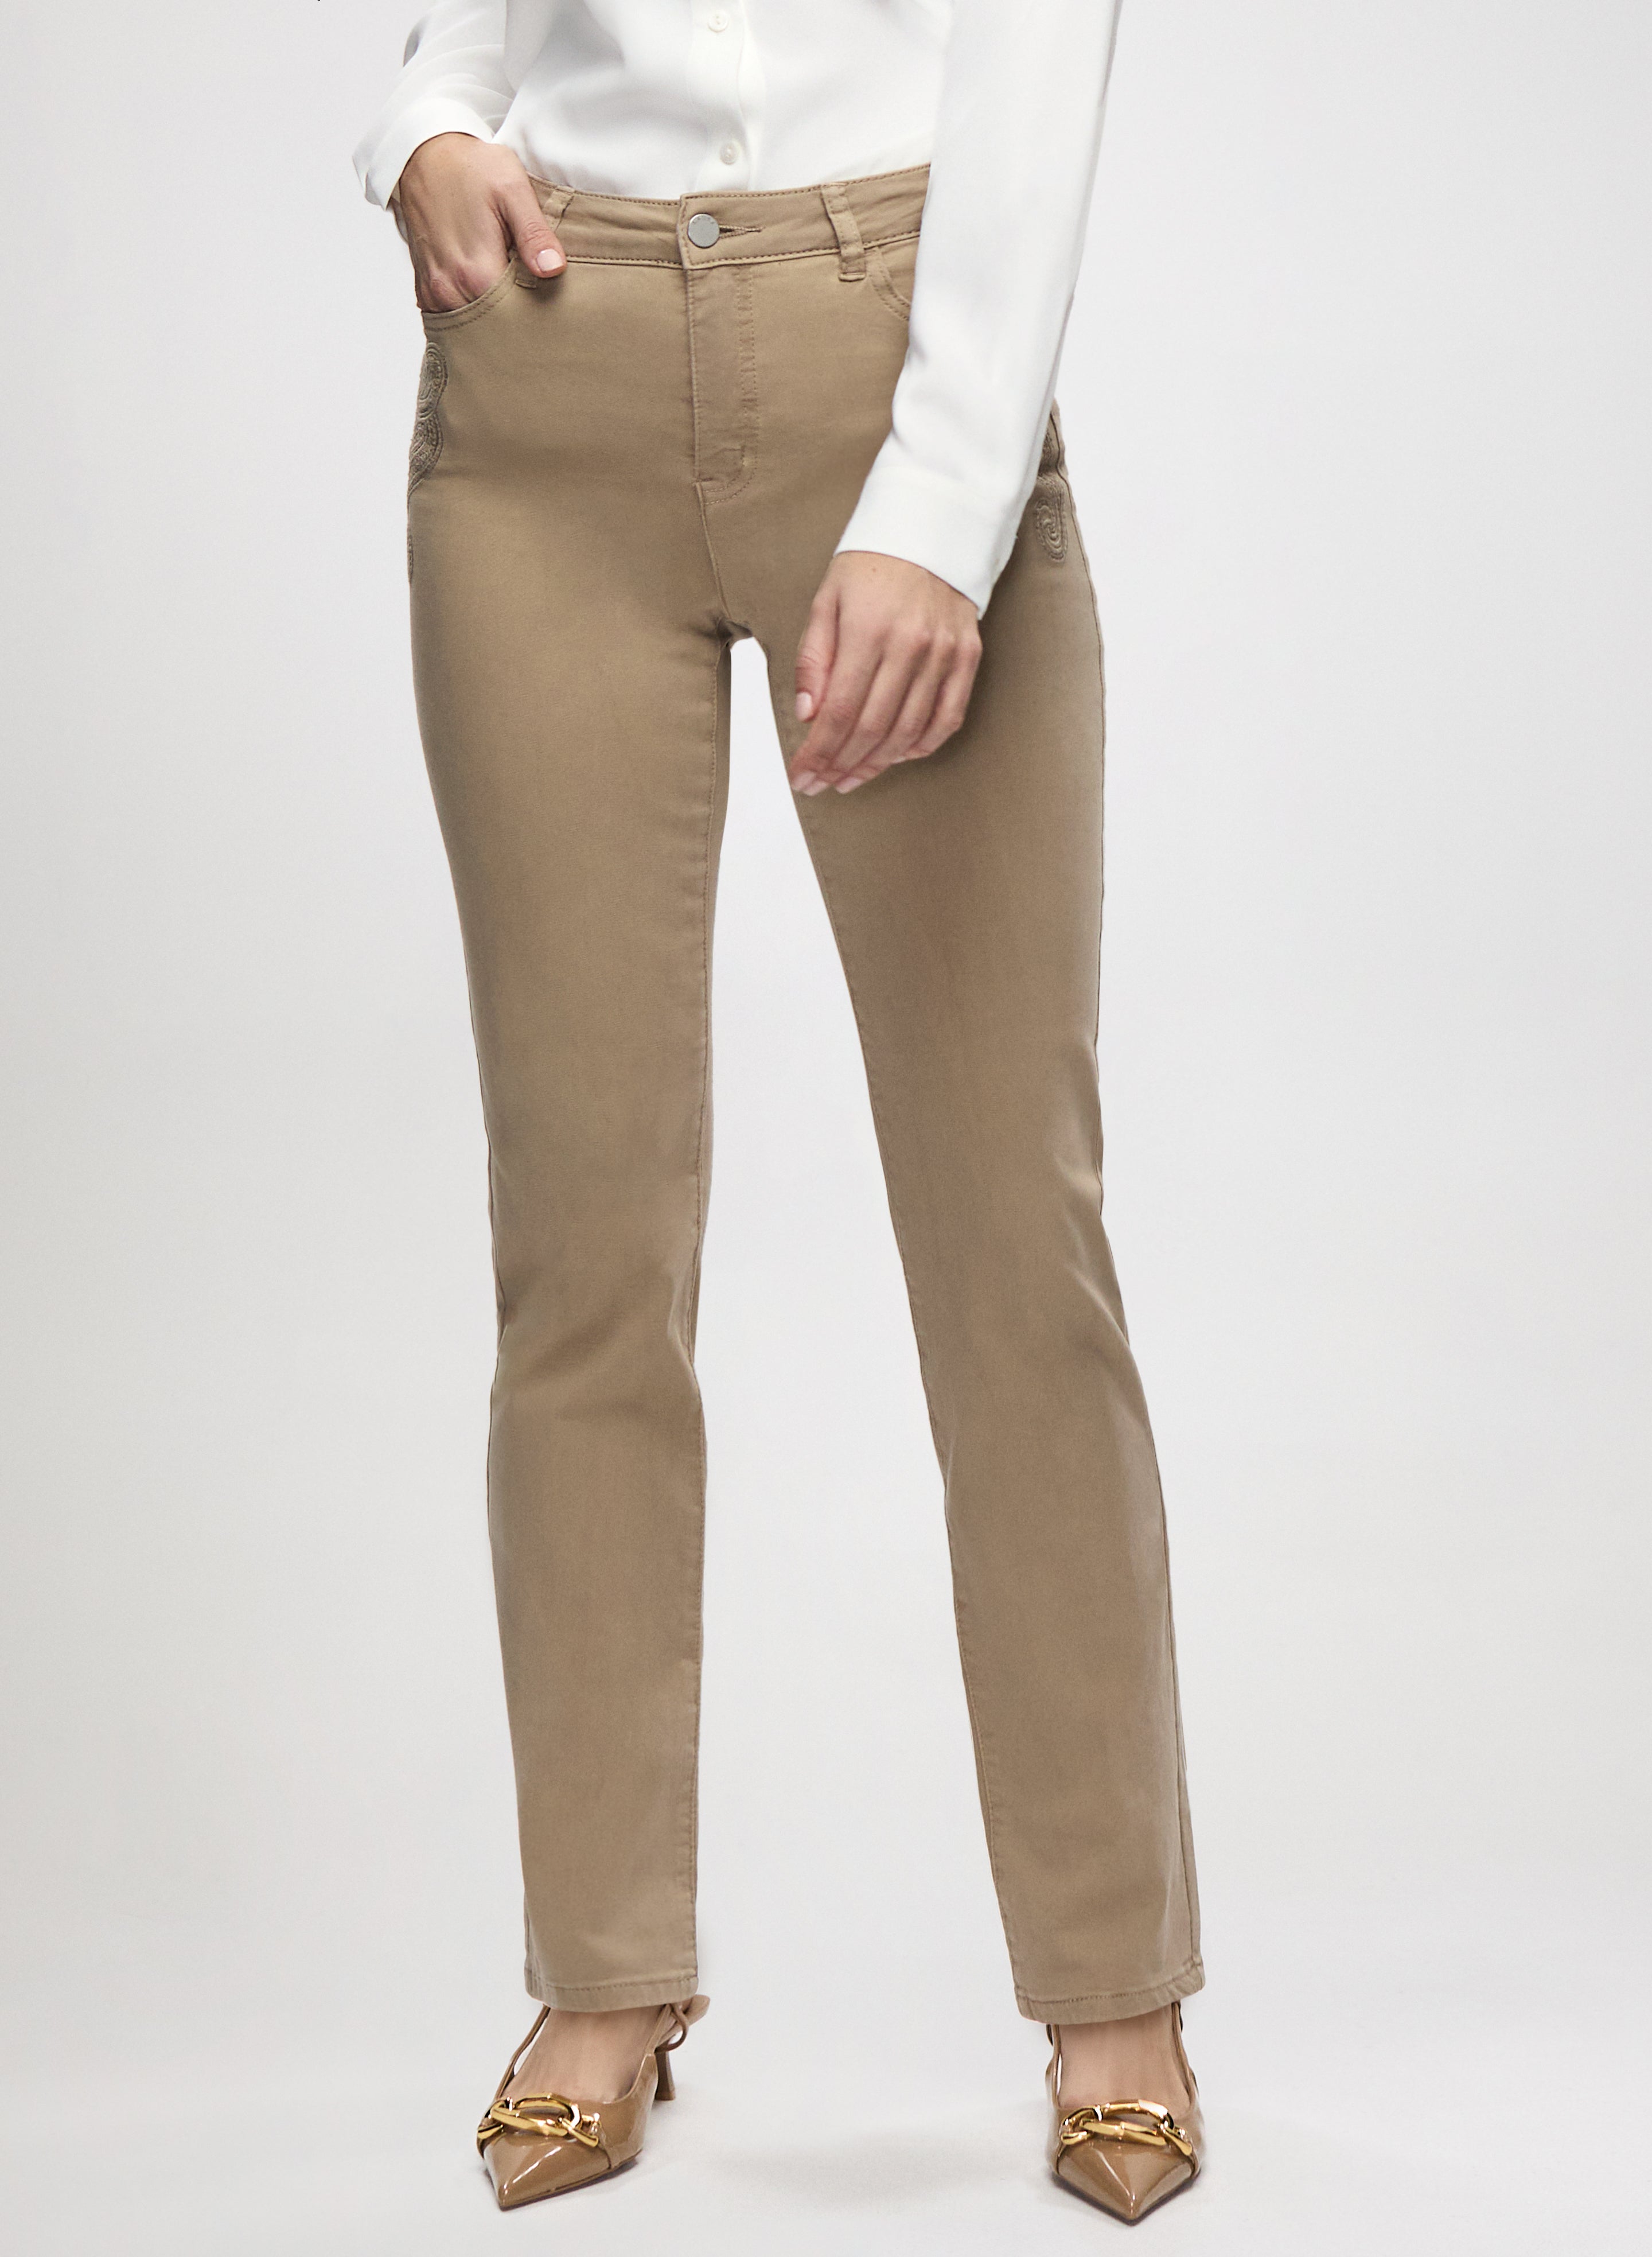 Crystal Fringe Faux Leather Pants in Camel Brown